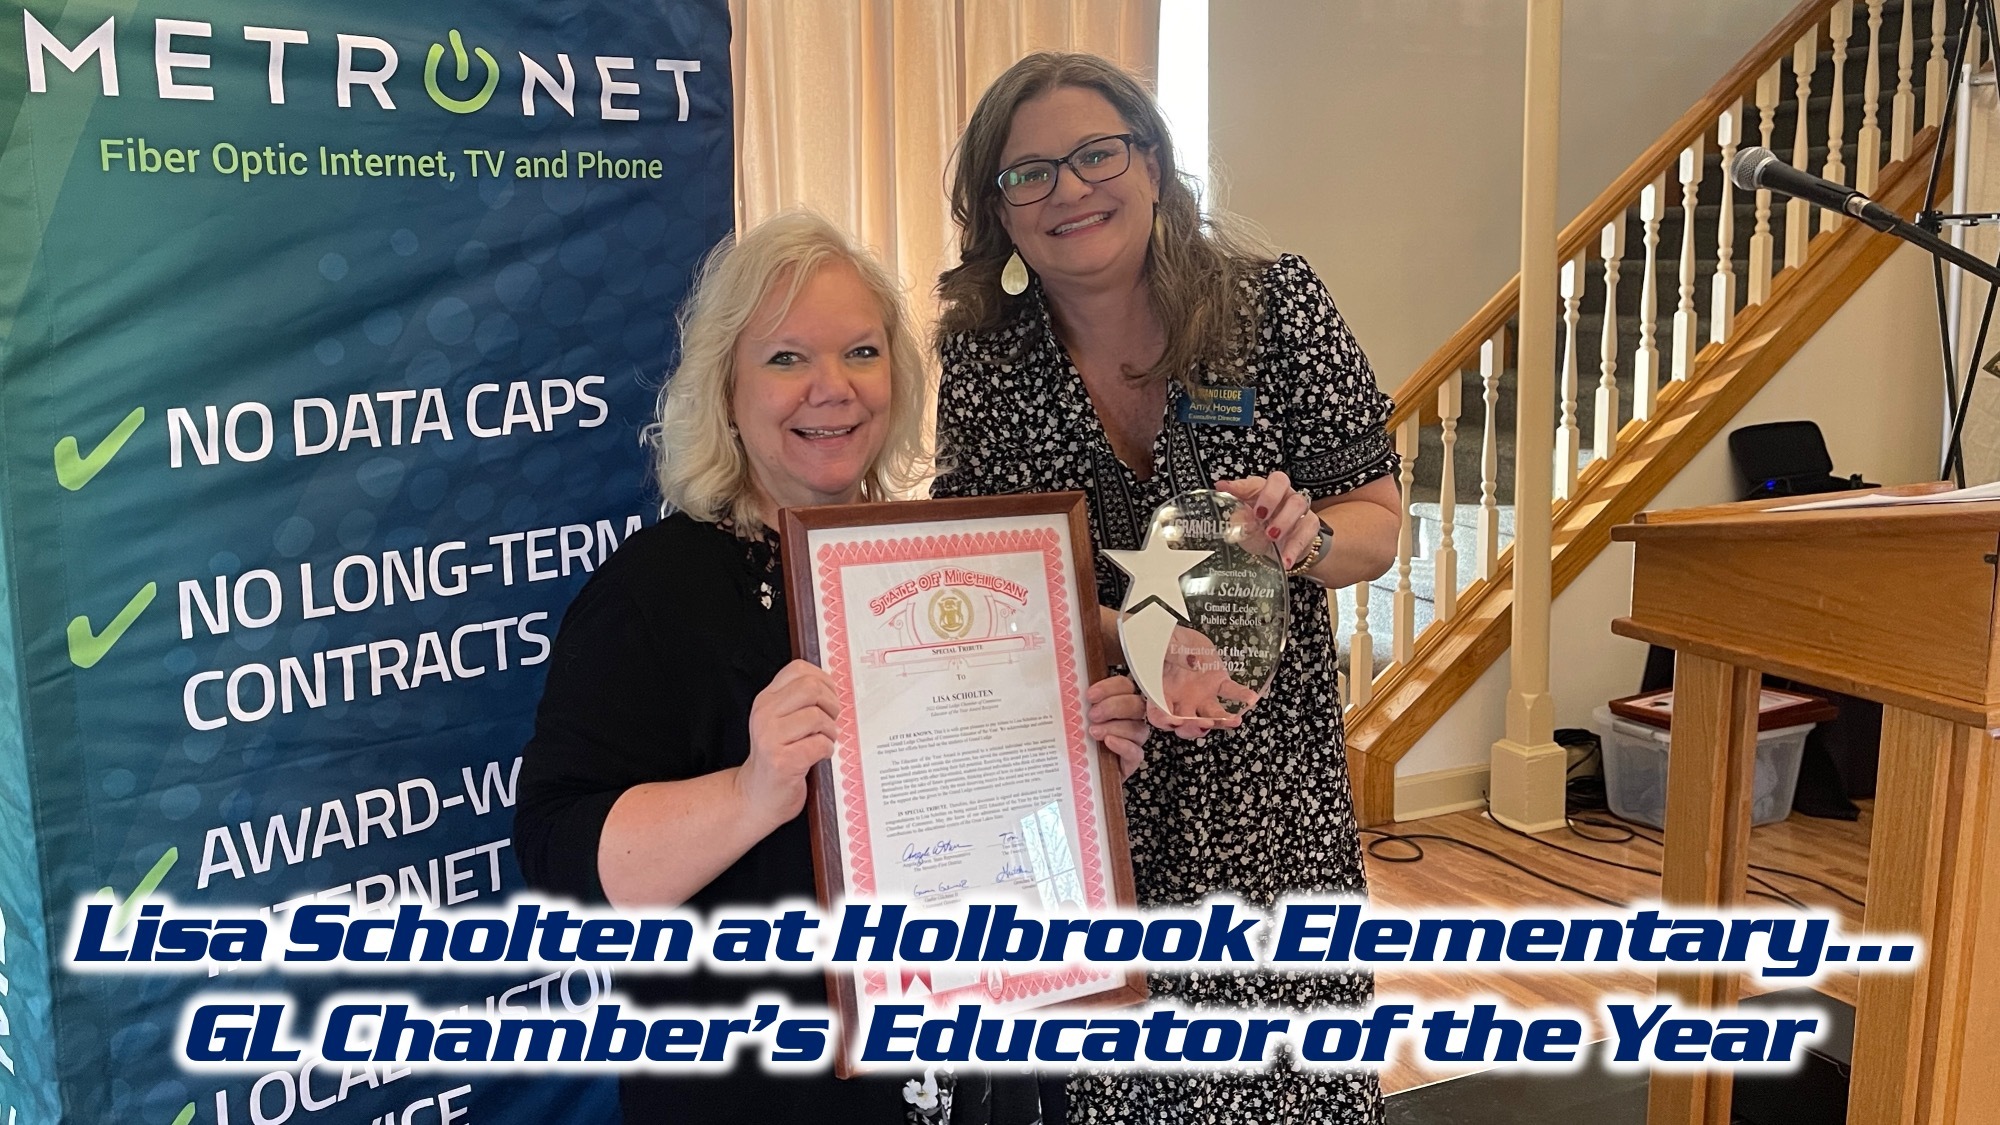 Lisa Scholten at Holbrook Elementary... GL Chamber's Educator of the Year